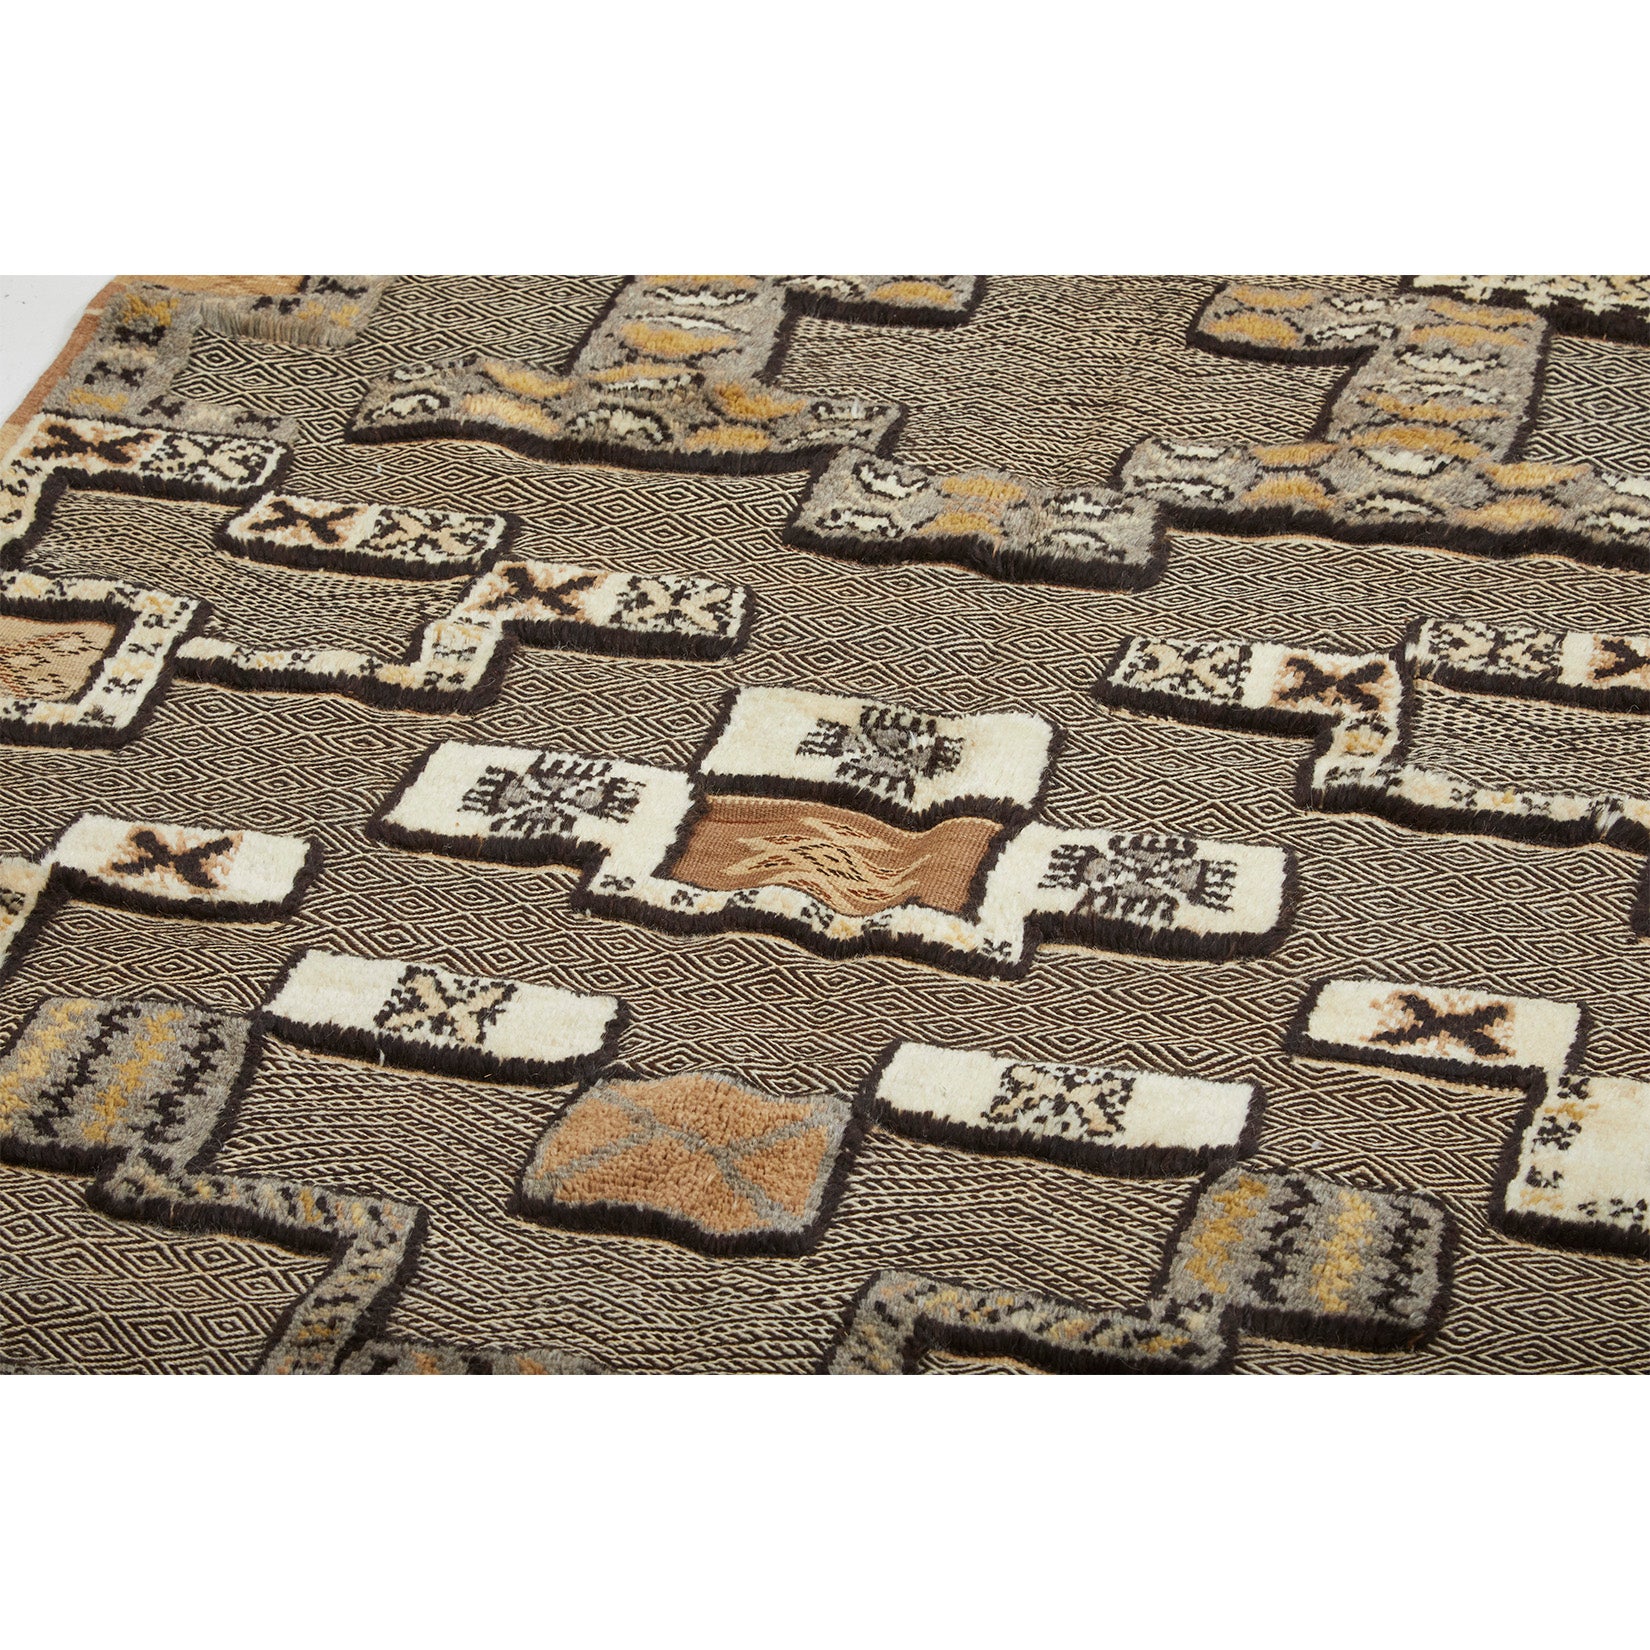 Brown, black, and white tribal berber carpet with both pile and flatweave sections - Kantara | Moroccan Rugs